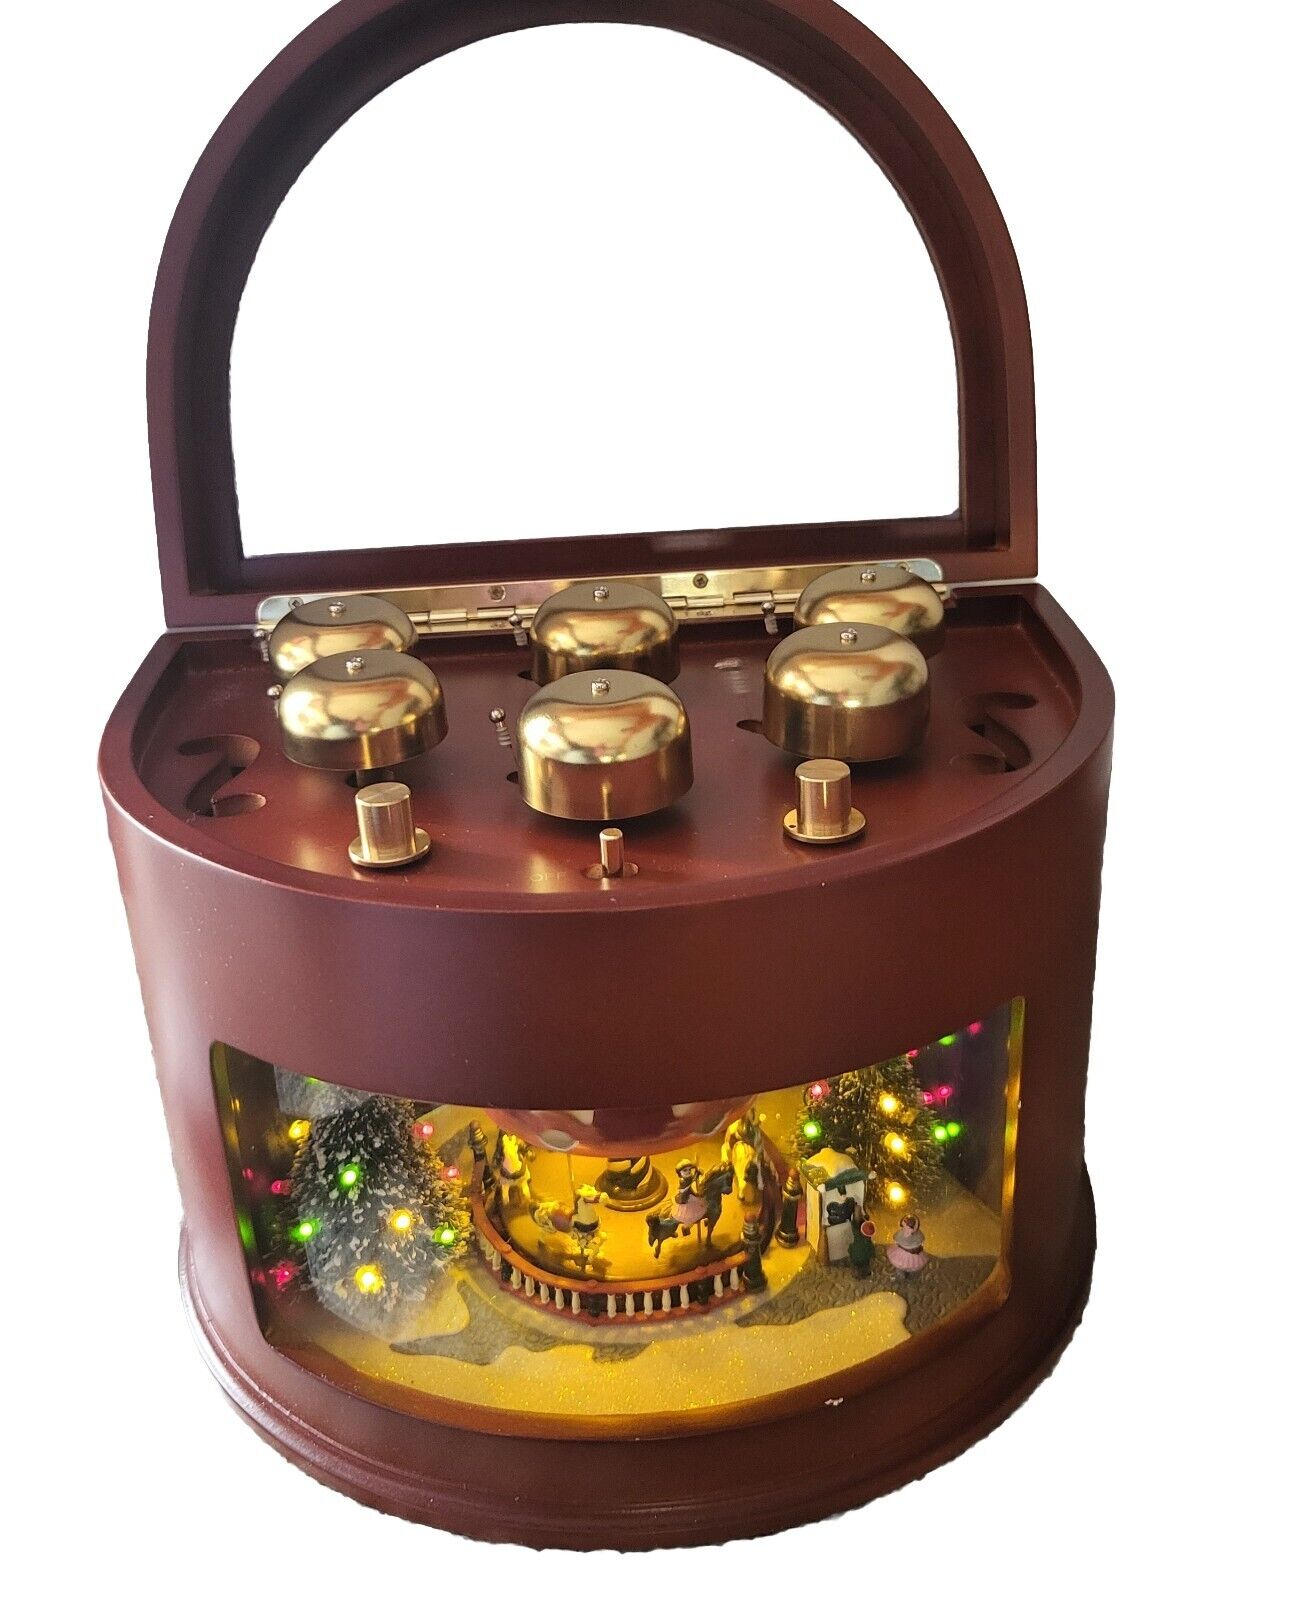 Mr. Christmas Animated Symphony Of Bells Carousel WORKS Original Box Incl. 